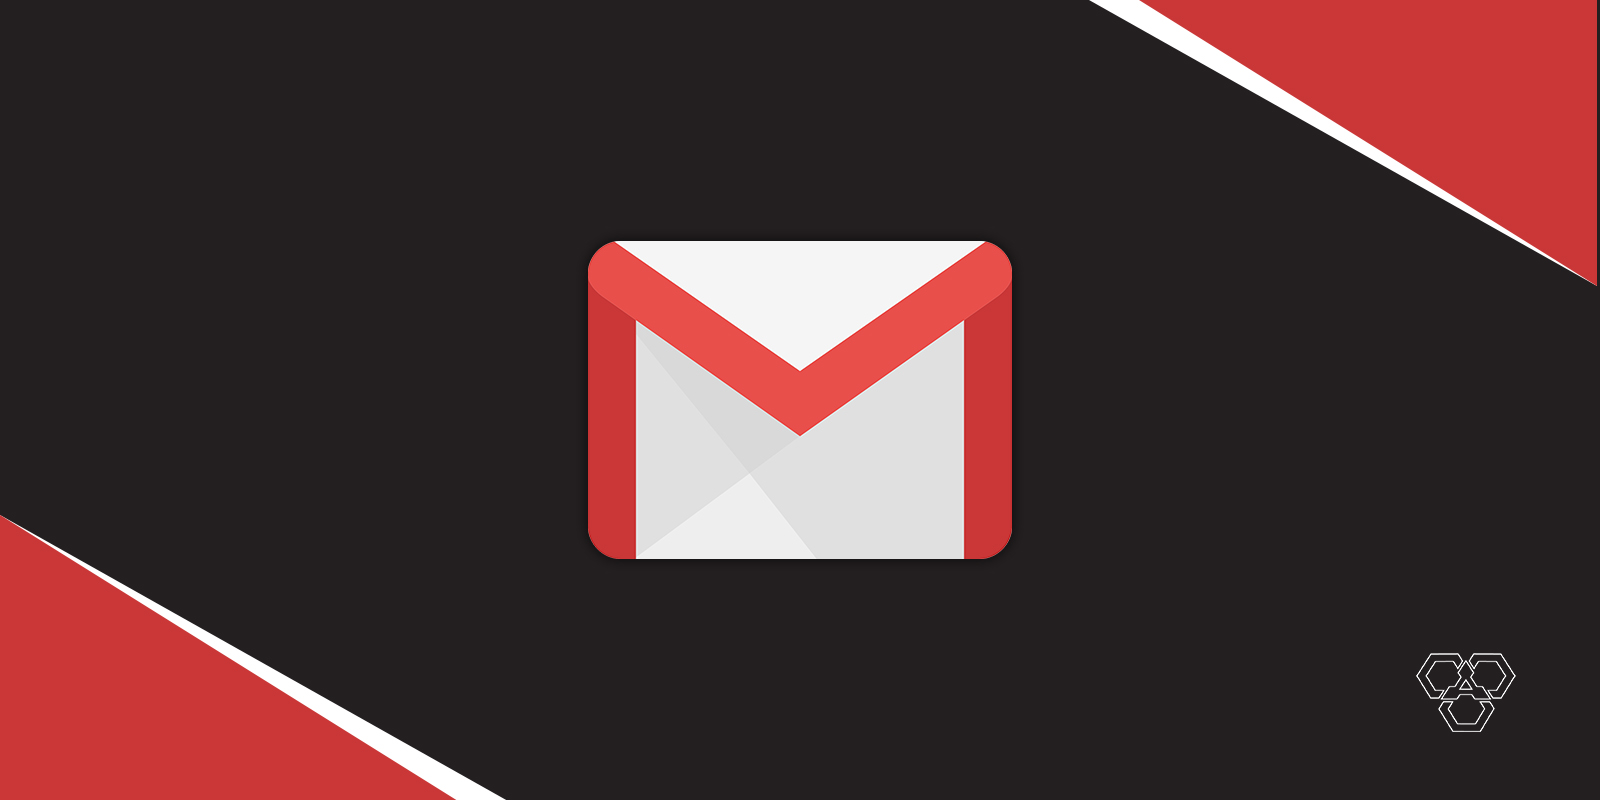 How To Change Gmail Theme